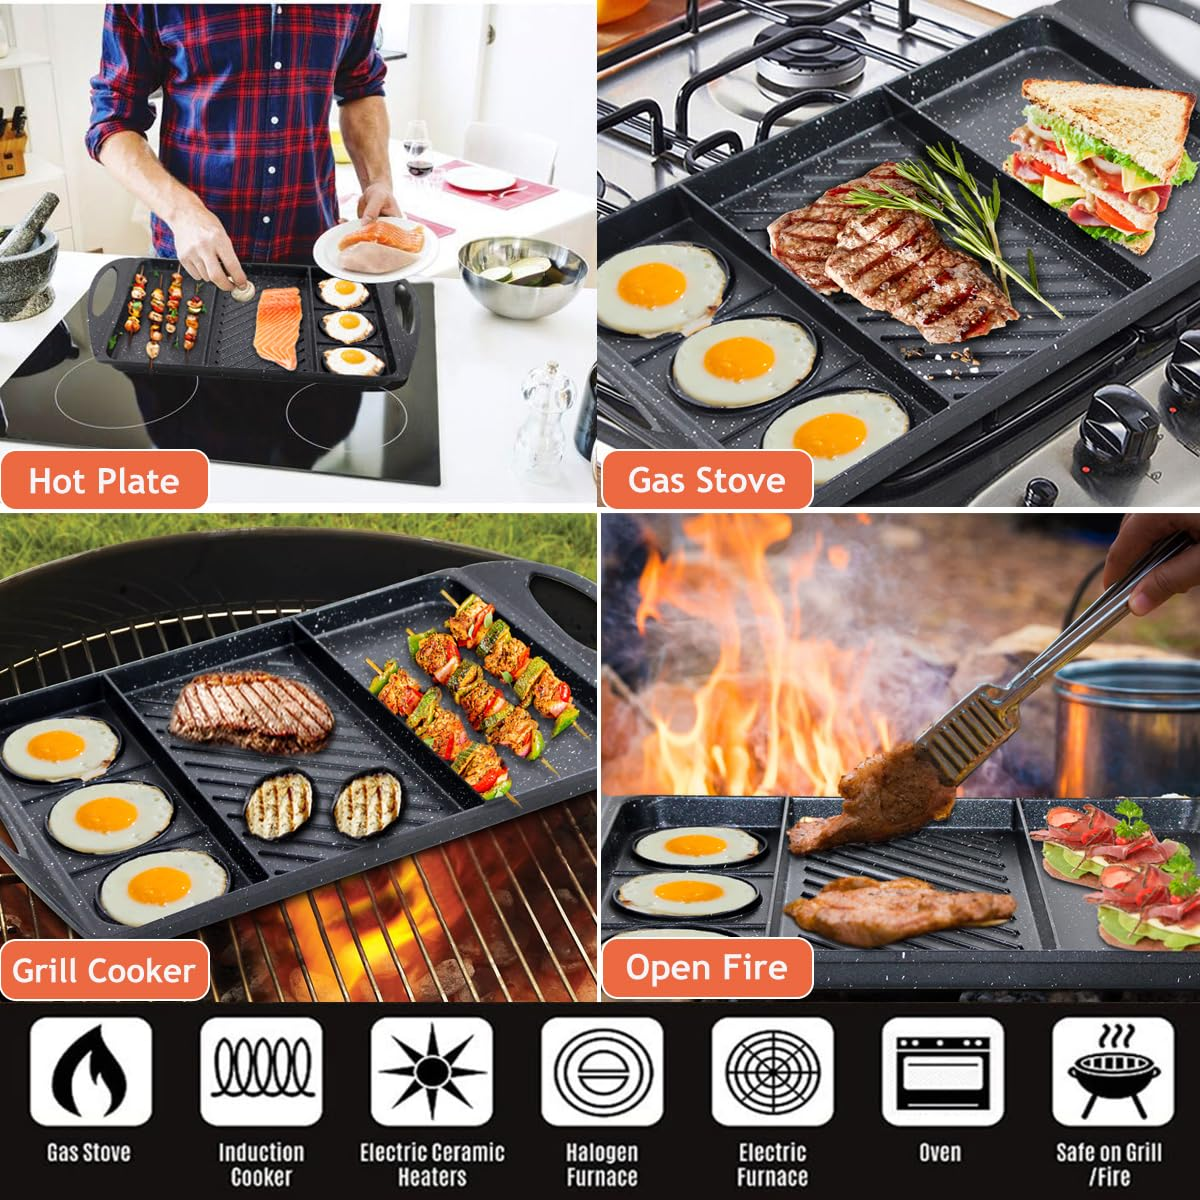 3 in 1 Flat Top Grill Griddle,Griddle Pan for Stove Top Double Burner Grill,Aluminum Pancake Griddle,Non-Stick Top Griddle Grill Compatible with All Stoves,Griddle For Camping/Indoor,Dishwasher Safe